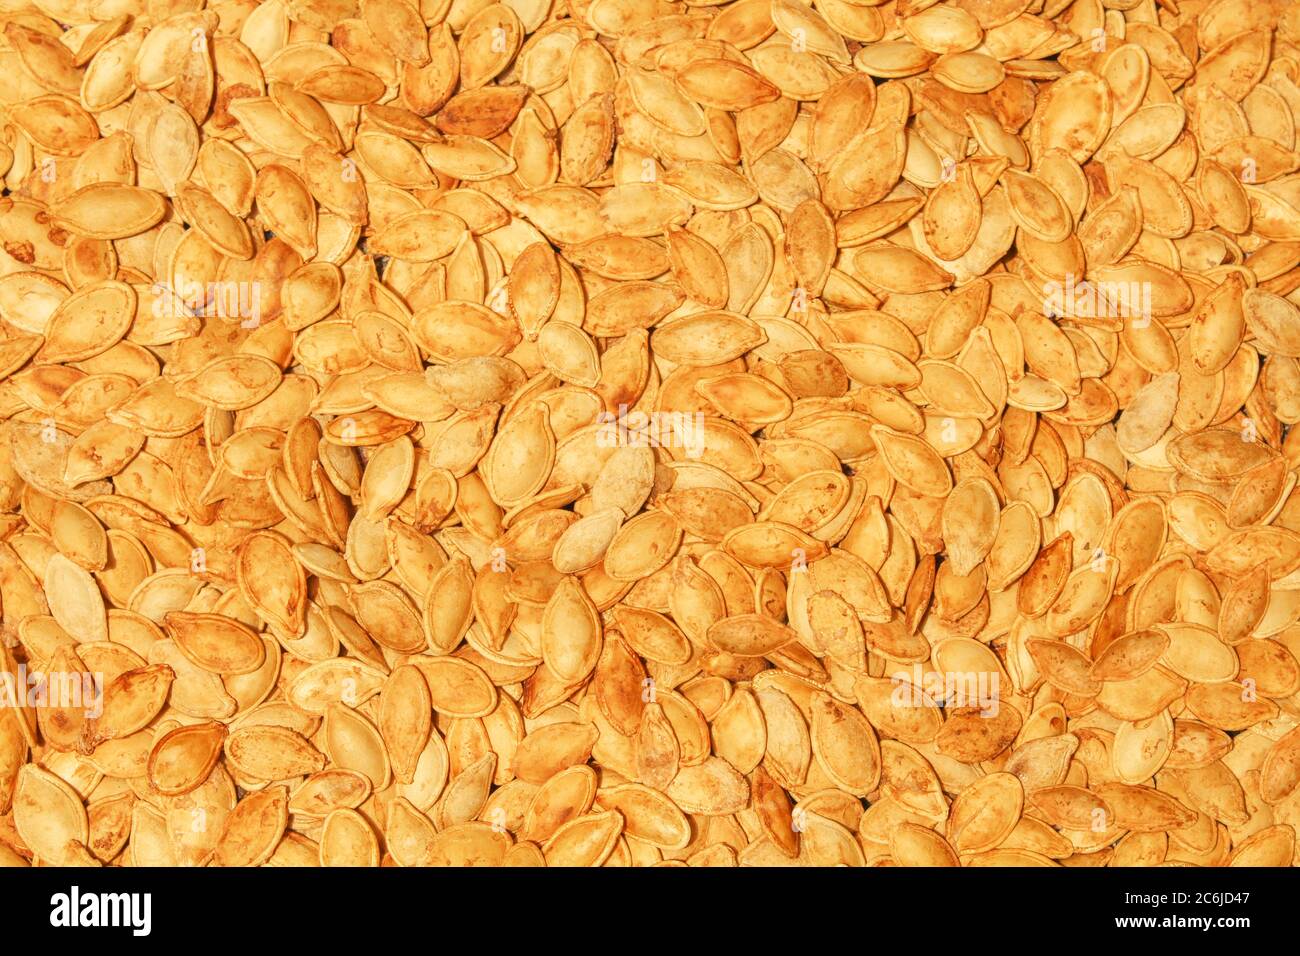 Fried and salty pumpkin seeds. Flat lay of roasted home cooked food Stock Photo